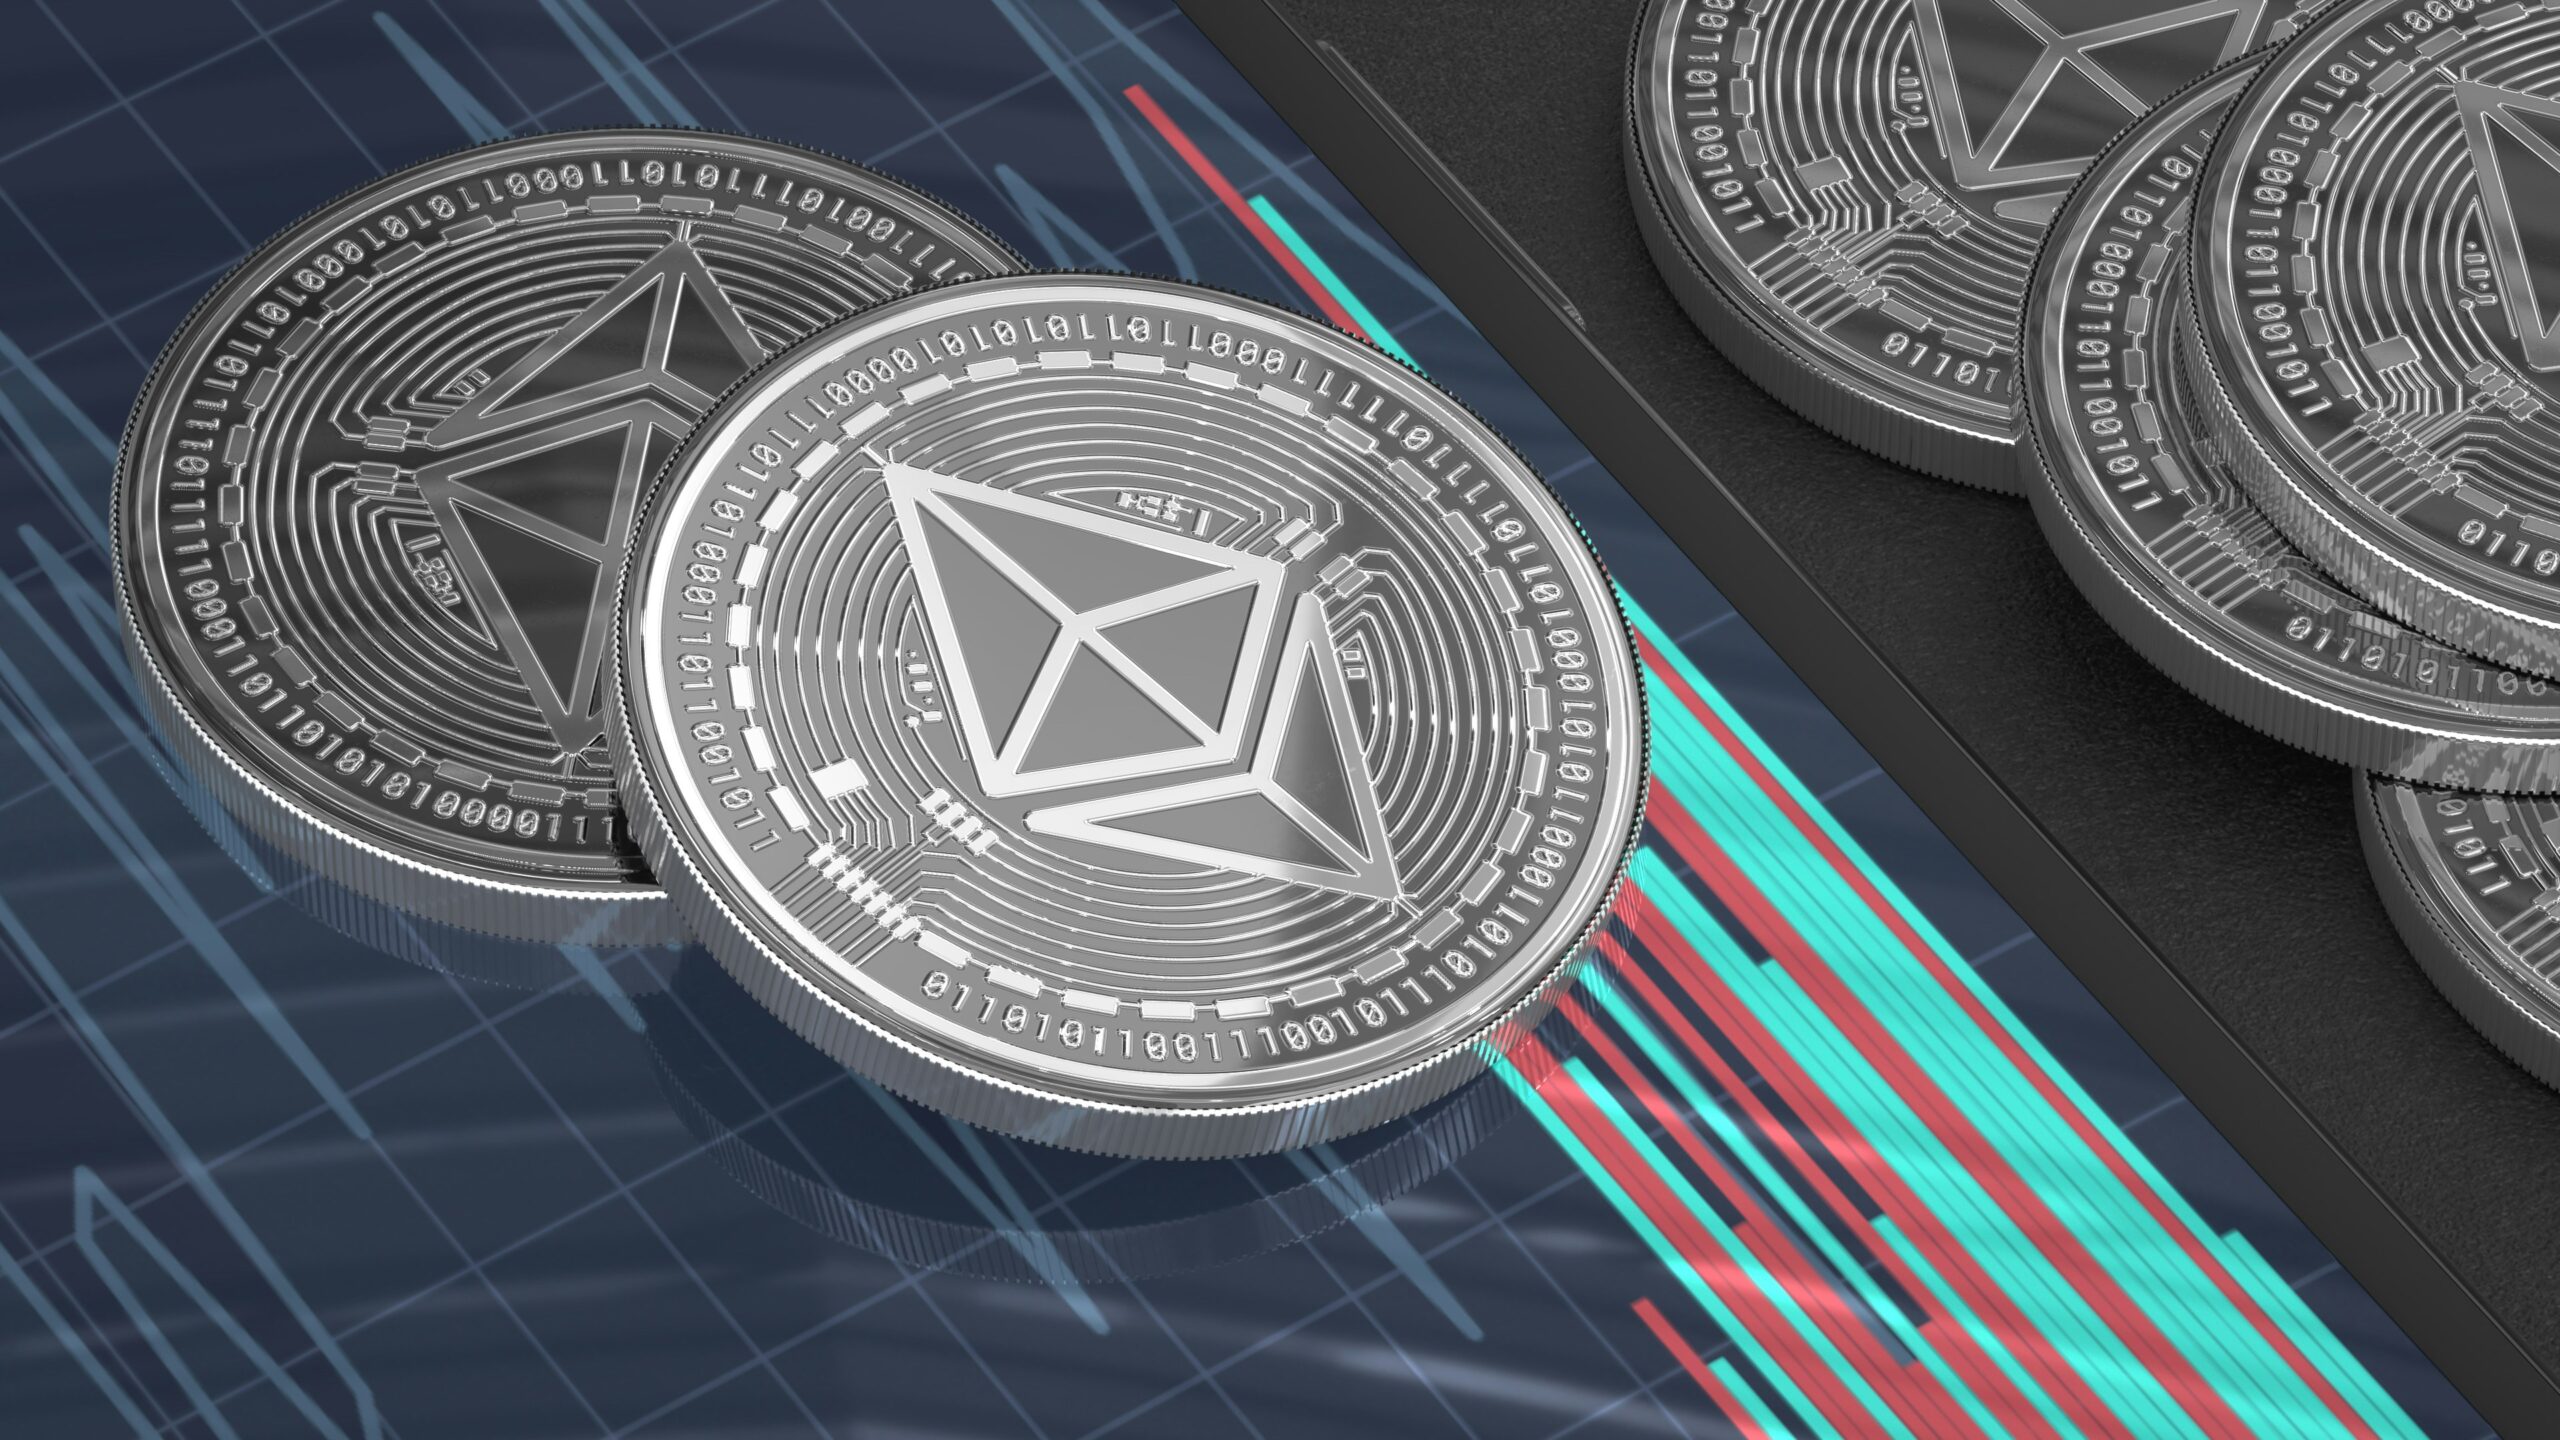 Hector McNeil, Co-Founder and Co-CEO of HANetf, comments: "The US Securities and Exchange Commission (SEC) has approved the sale of spot Ether ETFs in the United States.